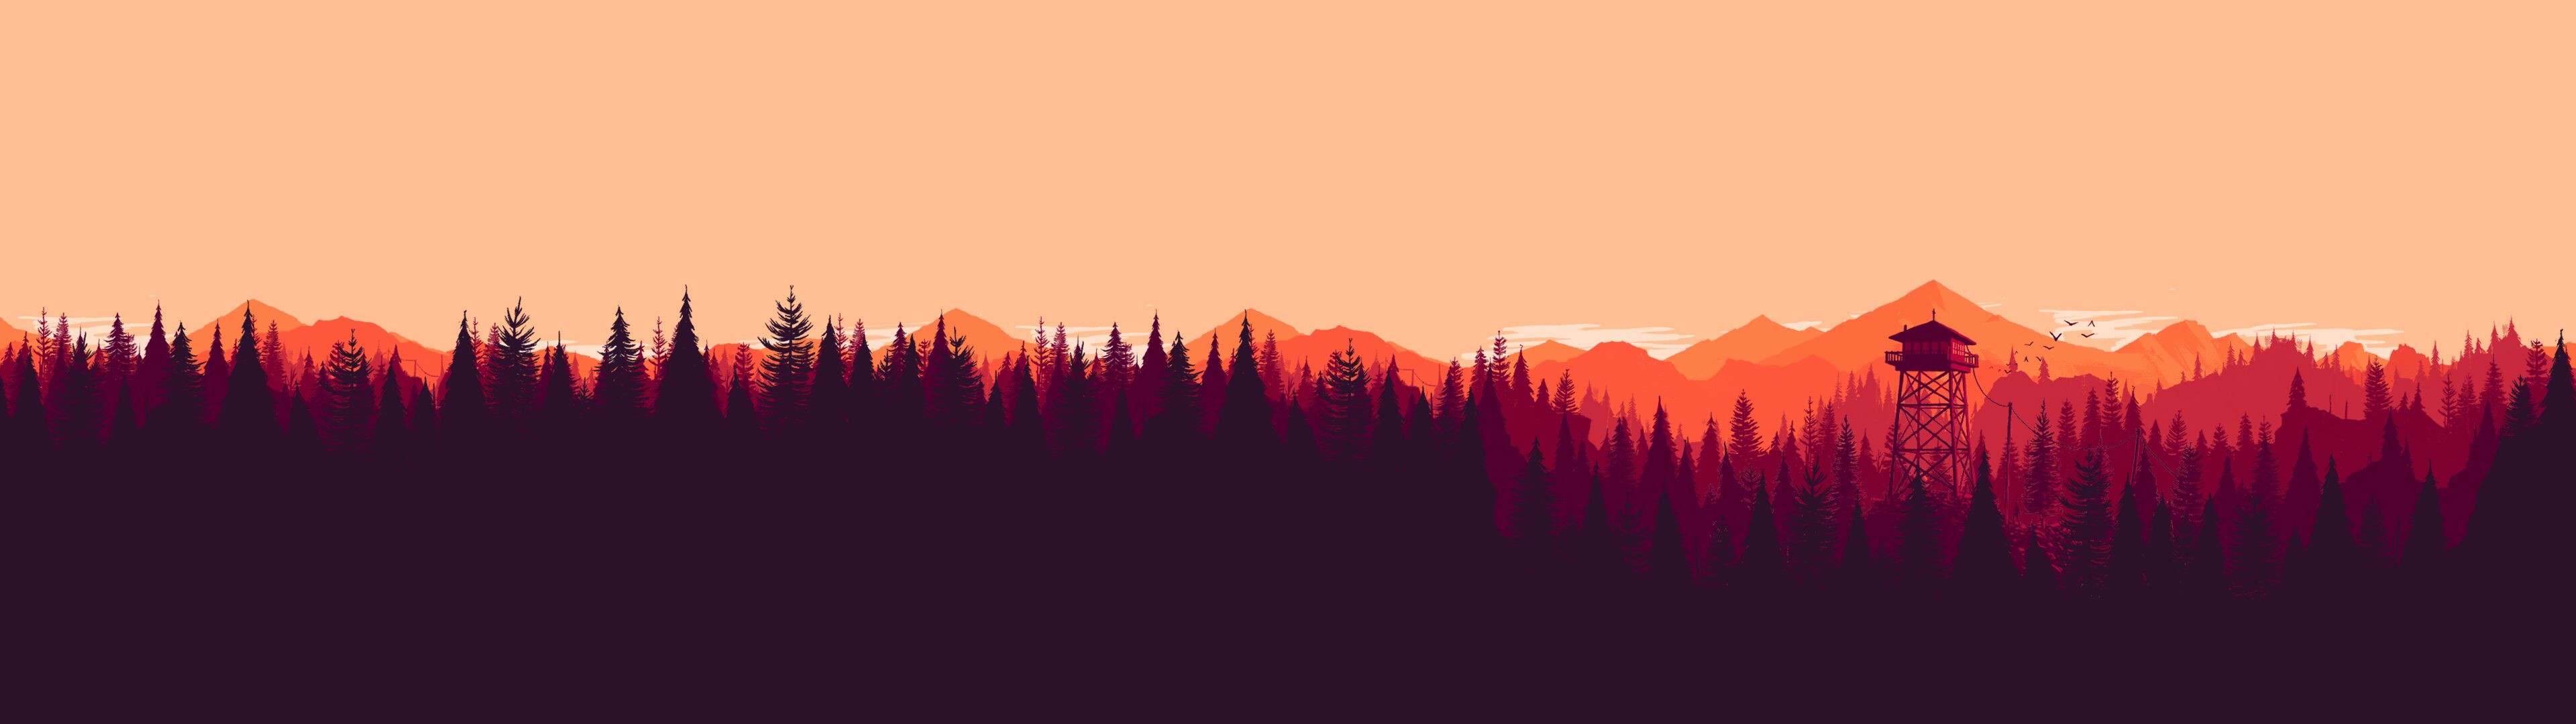 Firewatch: Henry's only means of communication is a walkie-talkie connecting him to his supervisor, Delilah, Action game. 3840x1080 Dual Screen Wallpaper.